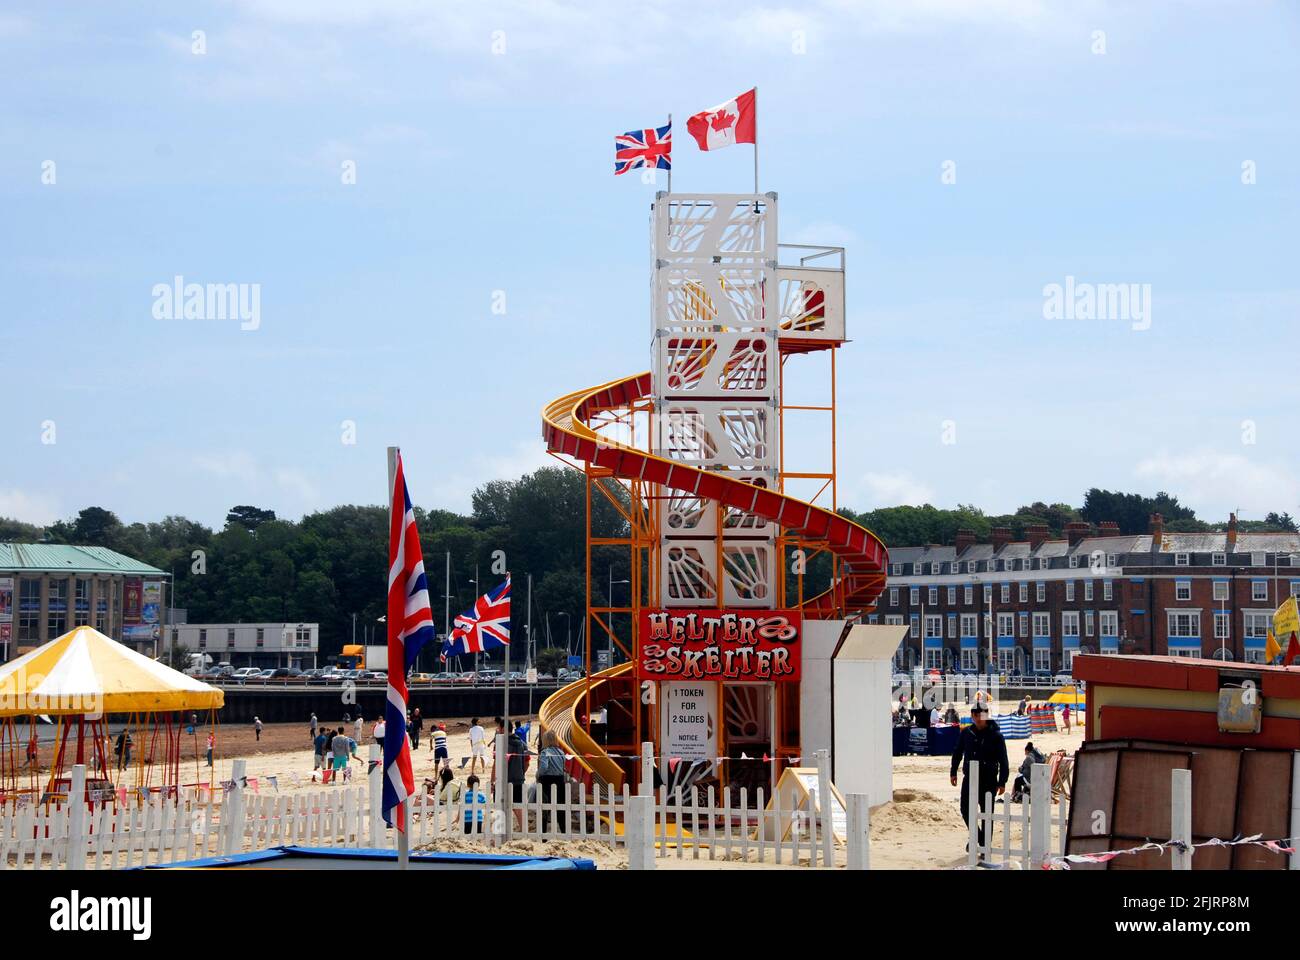 Helter Skelter amusement ride on the beach, Weymouth, Dorset, England with Union and Canadian flags flying at the top Stock Photo